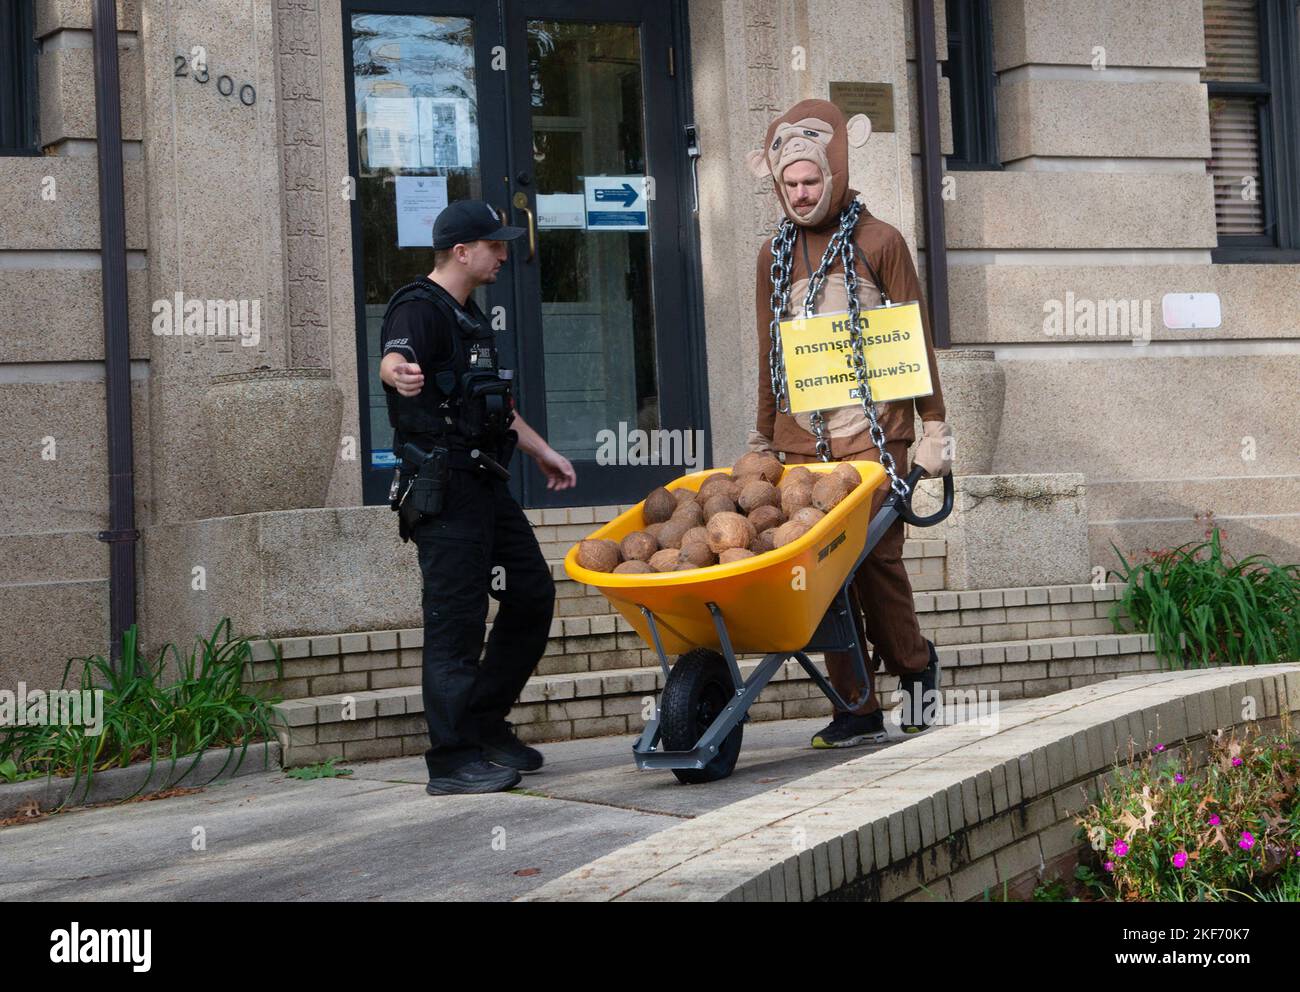 Washington DC, USA. 16th Nov, 2022. PETA protests at the Royal Thai Embassy in Washington DC to protest the use of monkeys that they claim are being used to pick coconuts. PETA activists dressed as monkeys dump coconuts in front of the embassy. November 16, 2022. Credit: Patsy Lynch/Media Punch/Alamy Live News Stock Photo